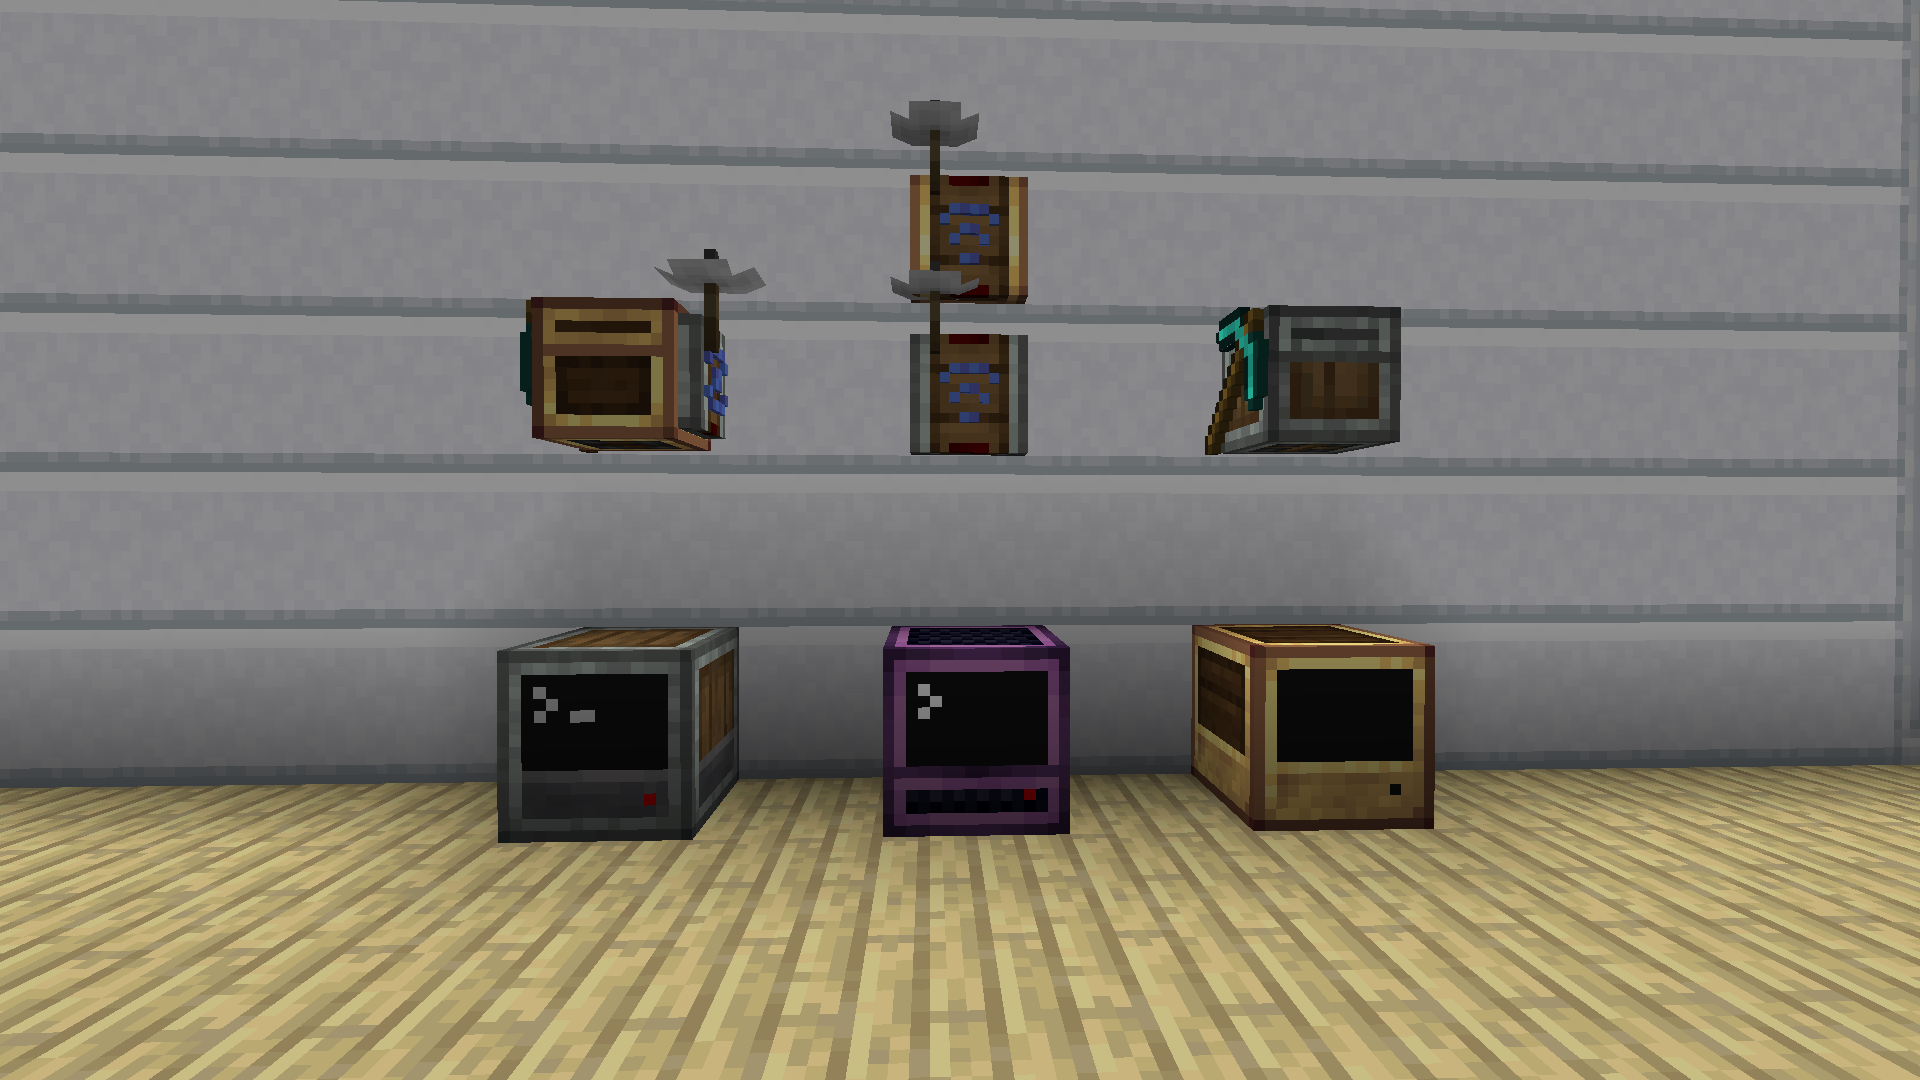 Some of the modified blocks...